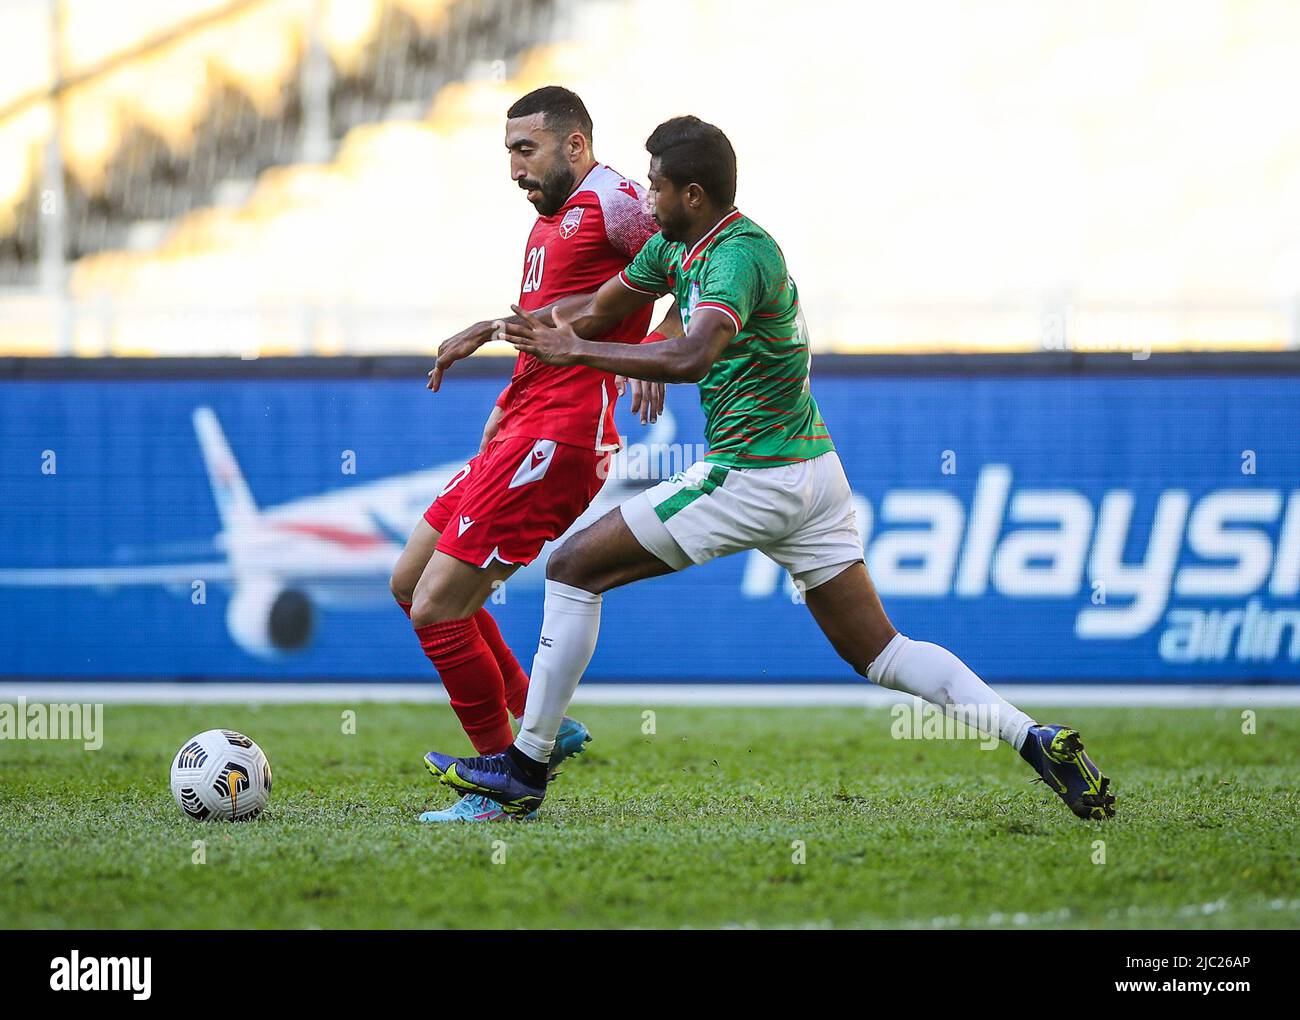 Mahdi Faisal Alhumaidan (L) of Bahrain and Md Rimon Hossain (R) of Bangladesh in action during the AFC Asian Cup 2023 qualifiers match between Bahrain and Bangladesh at the National Stadium Bukit Jalil. Final score; Bahrain 2:0 Bangladesh. (Photo by Wong Fok Loy / SOPA Images/Sipa USA) Stock Photo